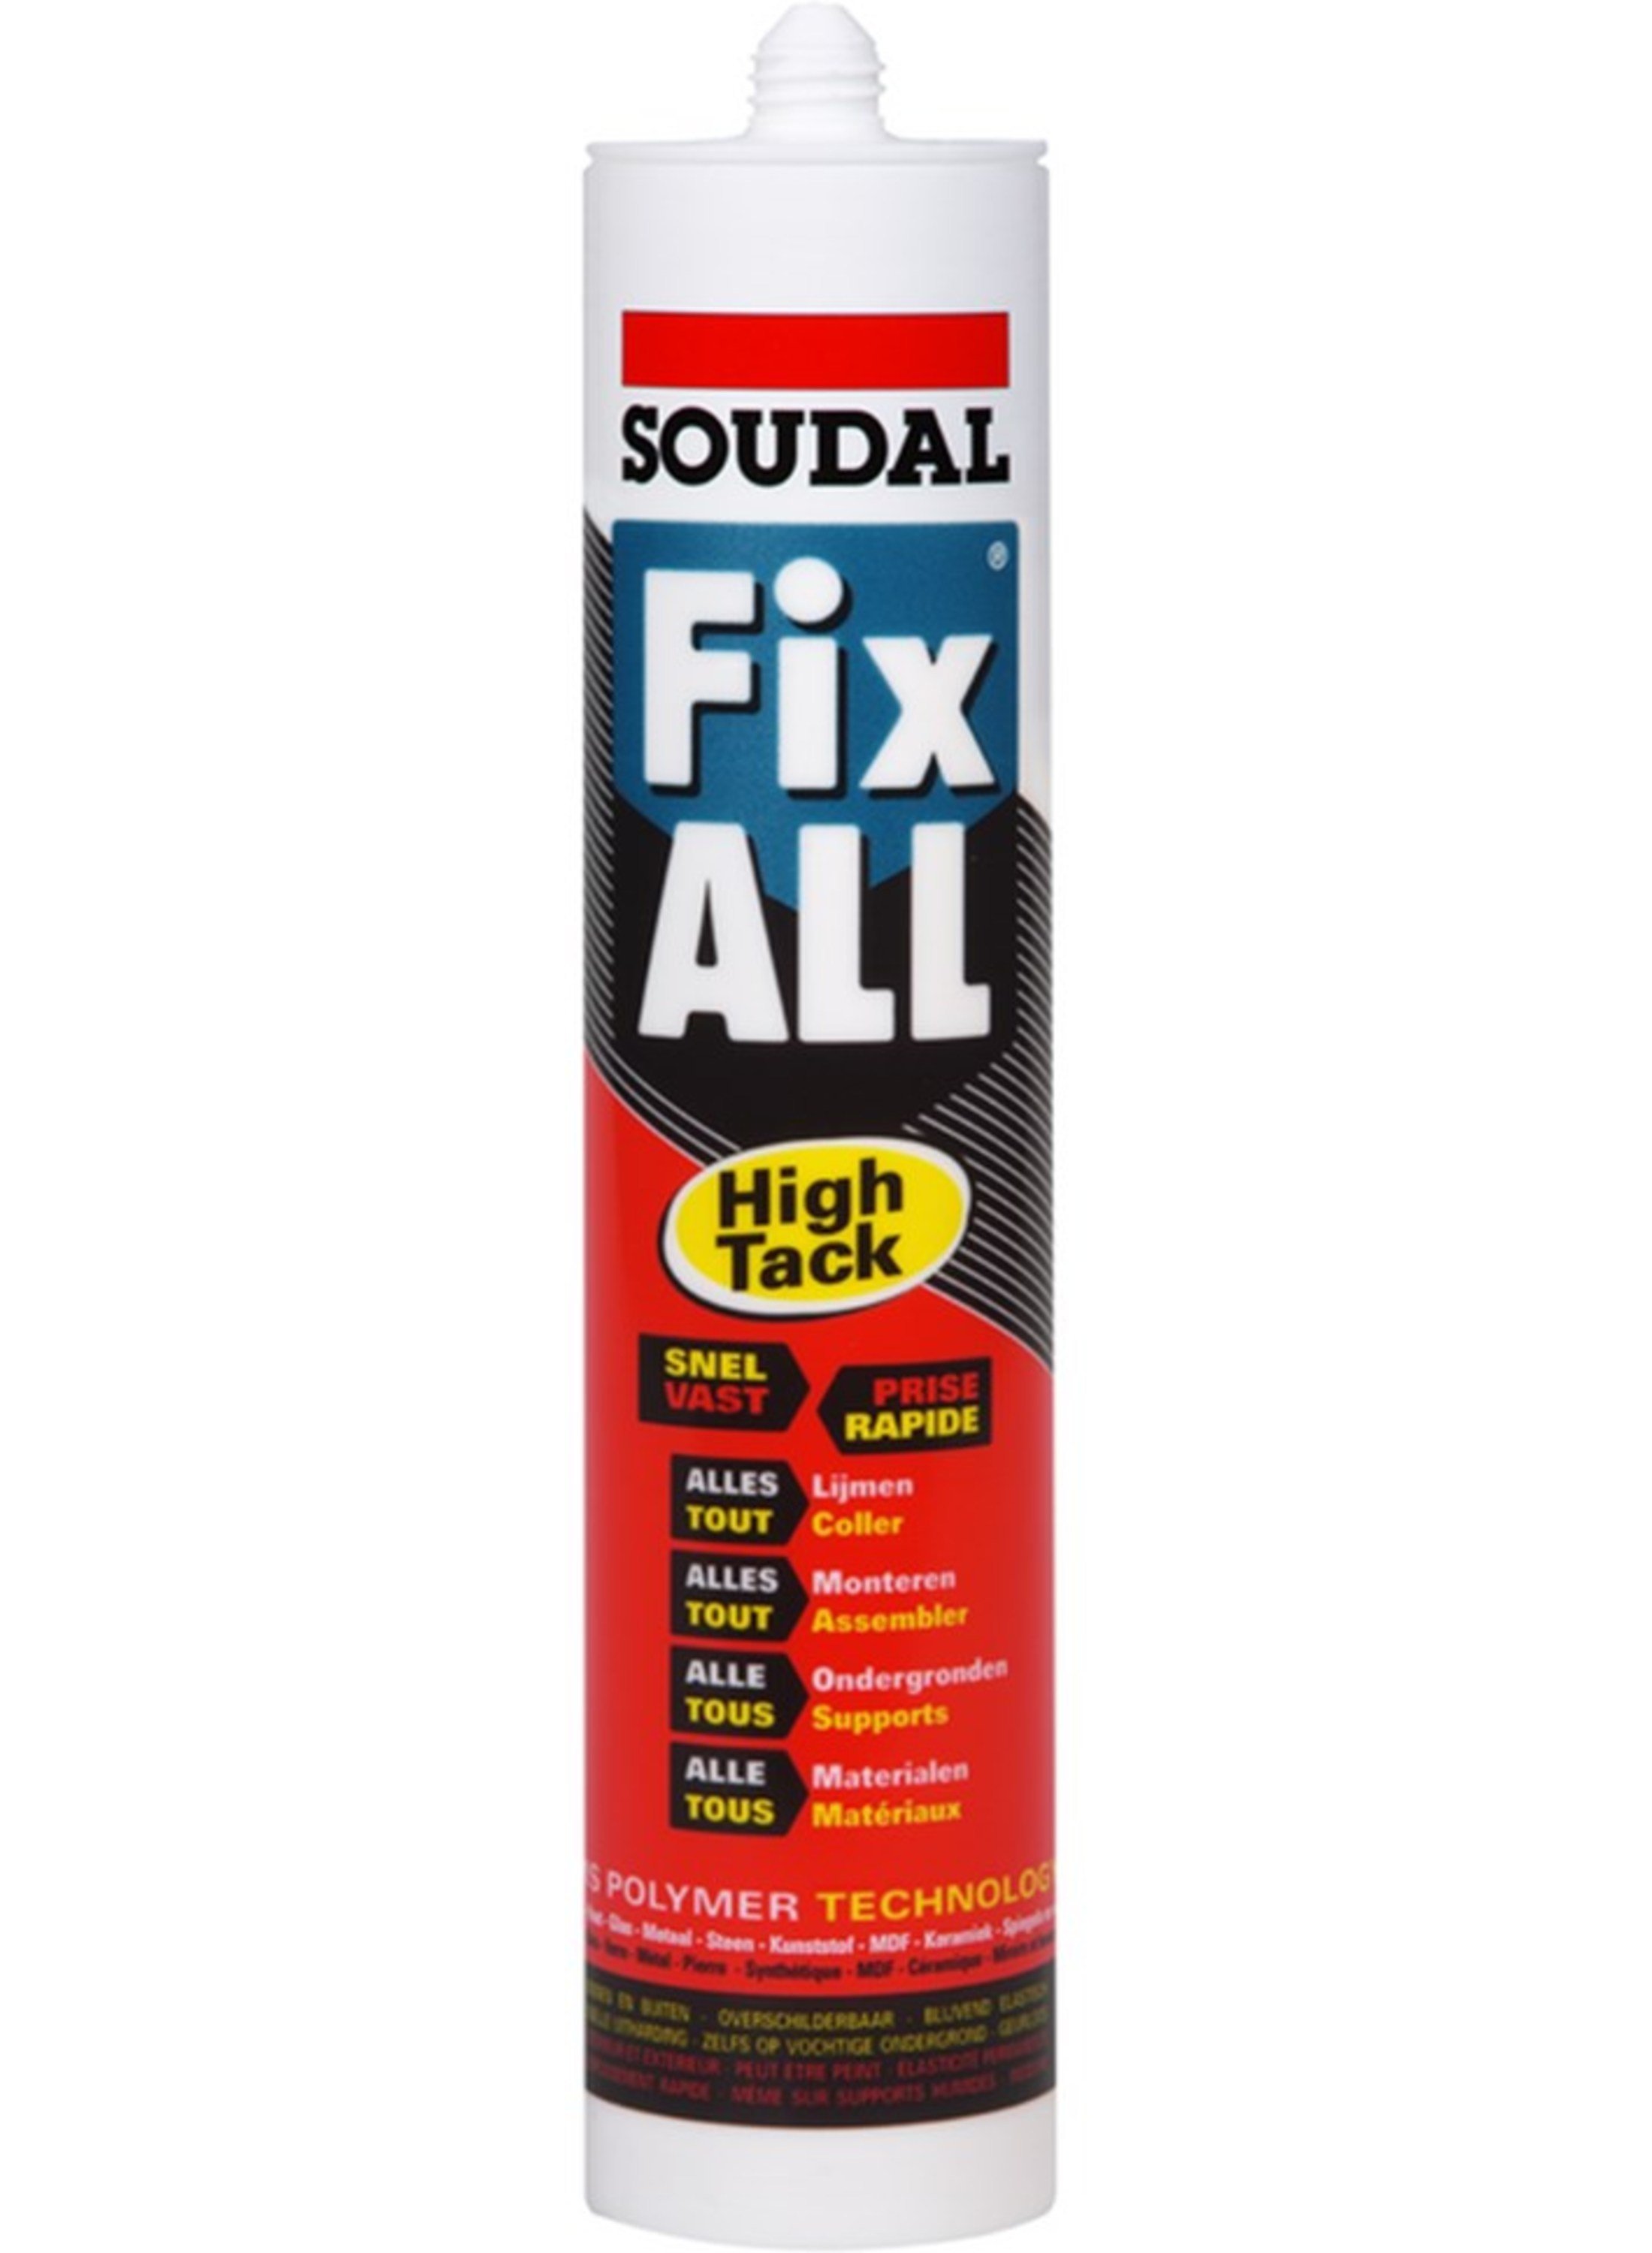 SOUDAL	FIX - ALL "HIGH-TACK"  Dunne tuit kokers grijs 290 ml